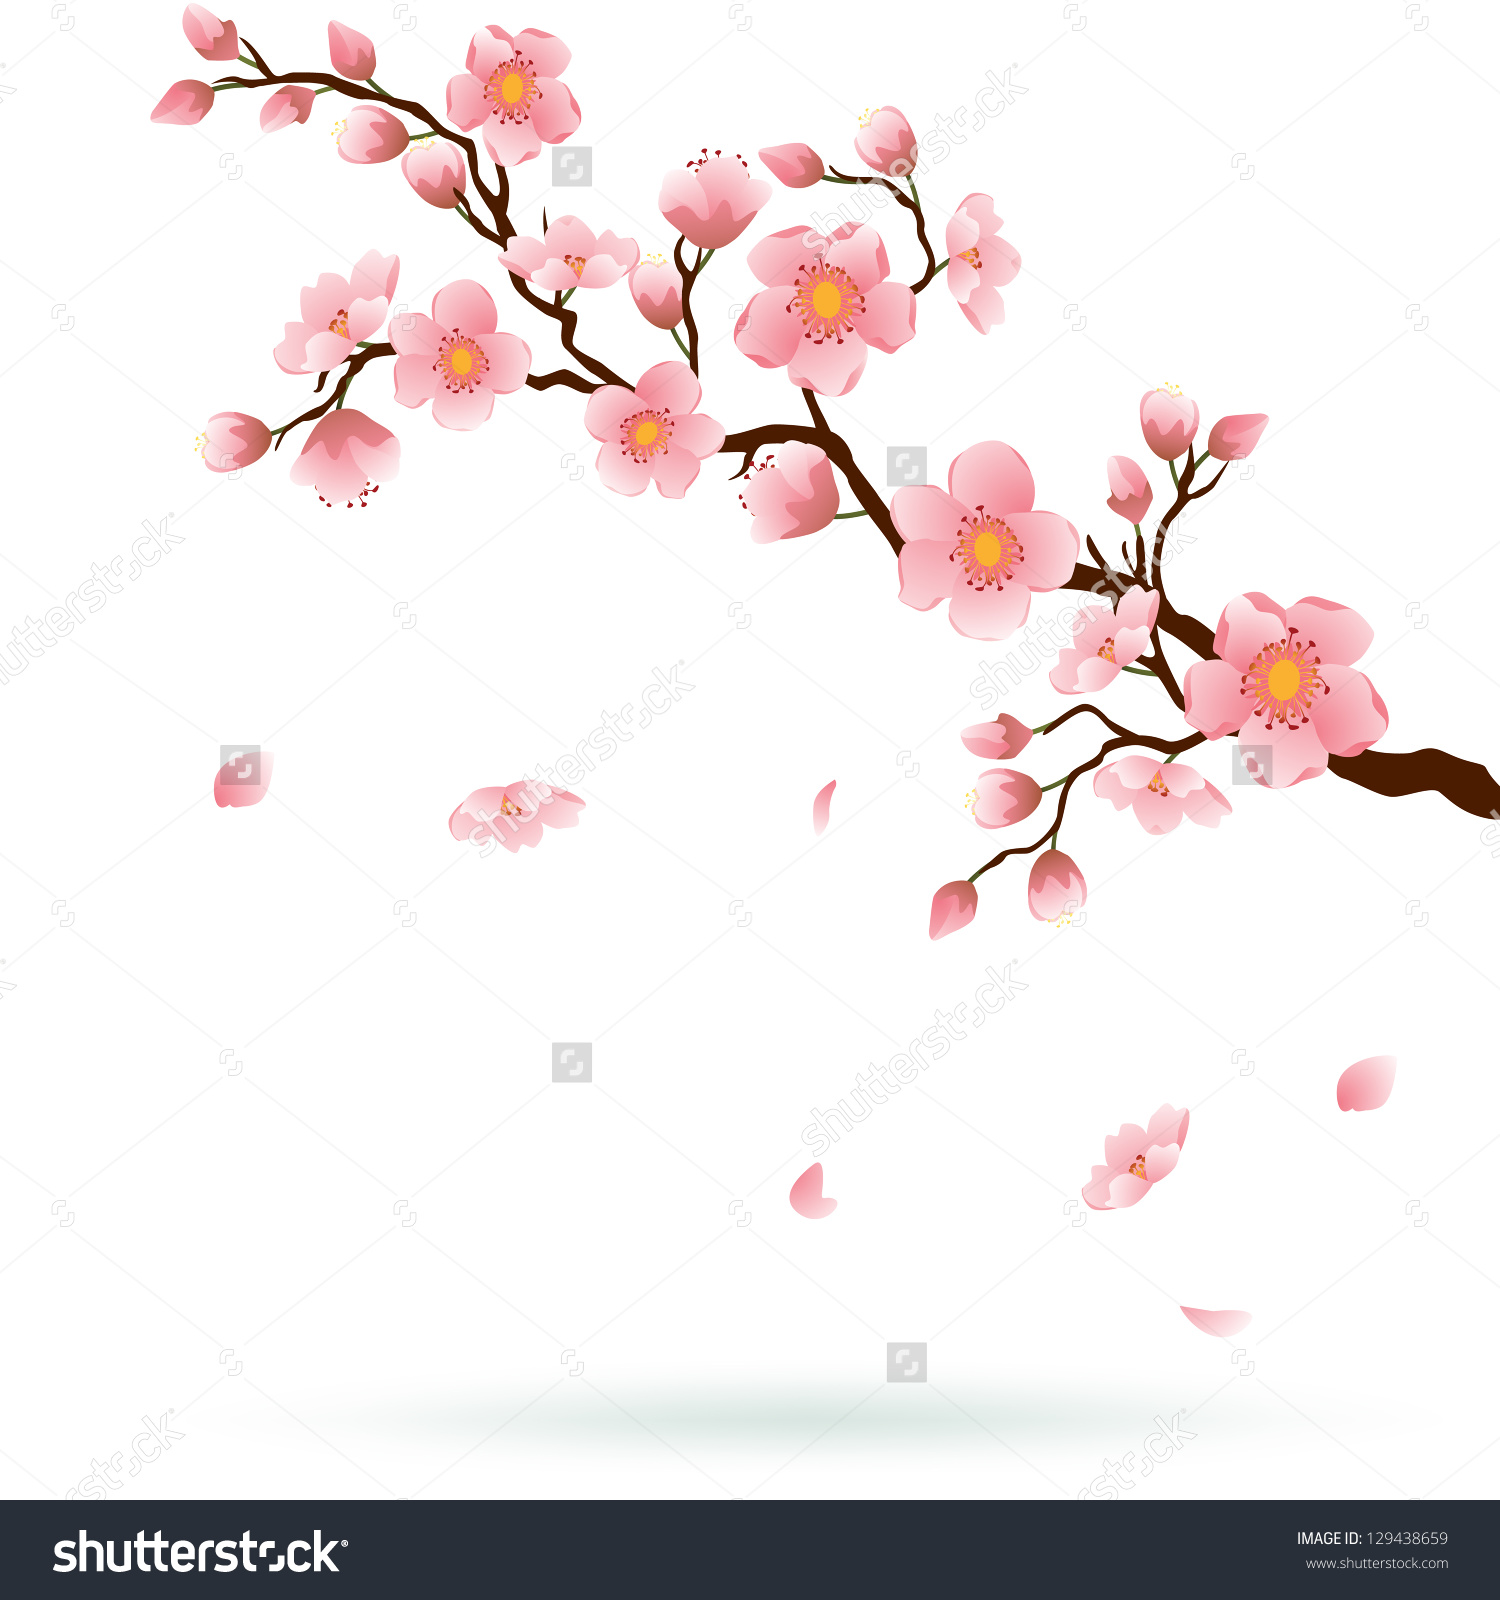 Cherry Blossom Branch Drawing at GetDrawings.com | Free for personal ...